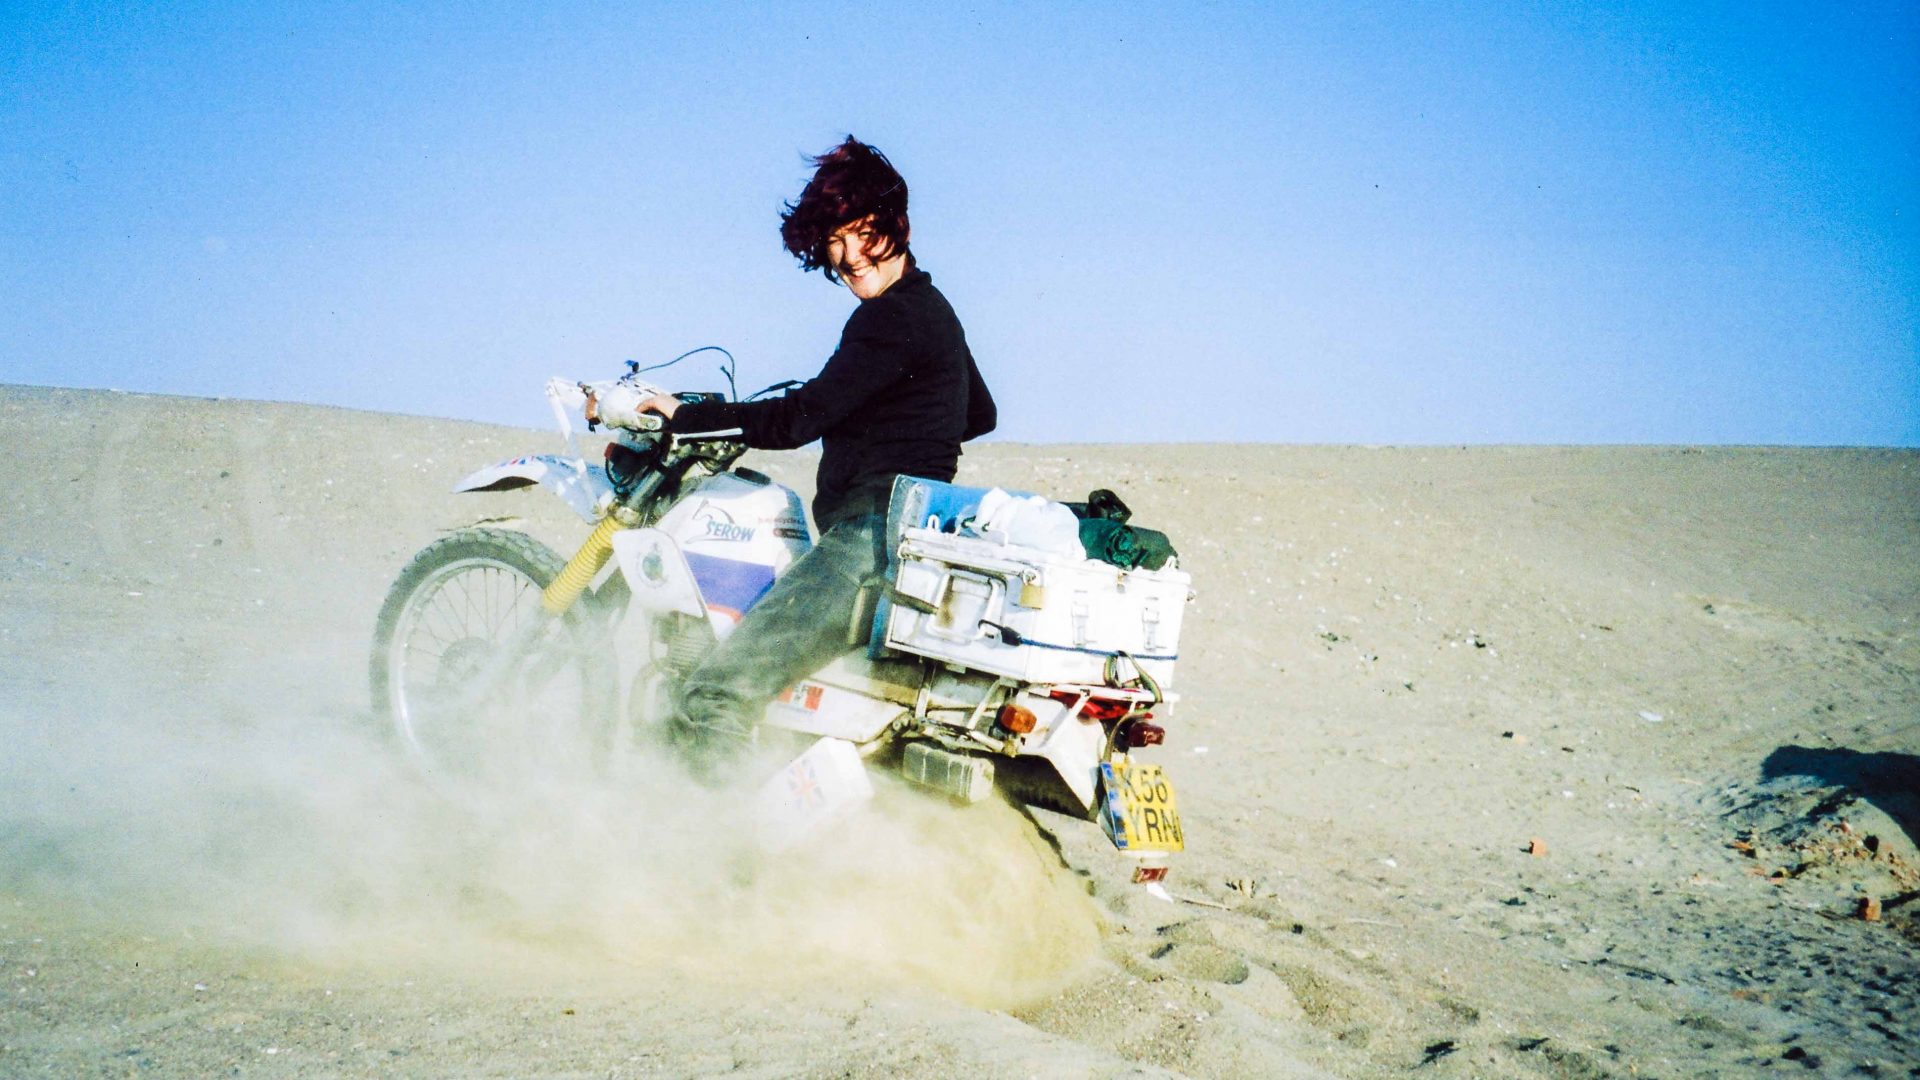 Riding Solo One Woman S Motorcycling Adventures In Iran And